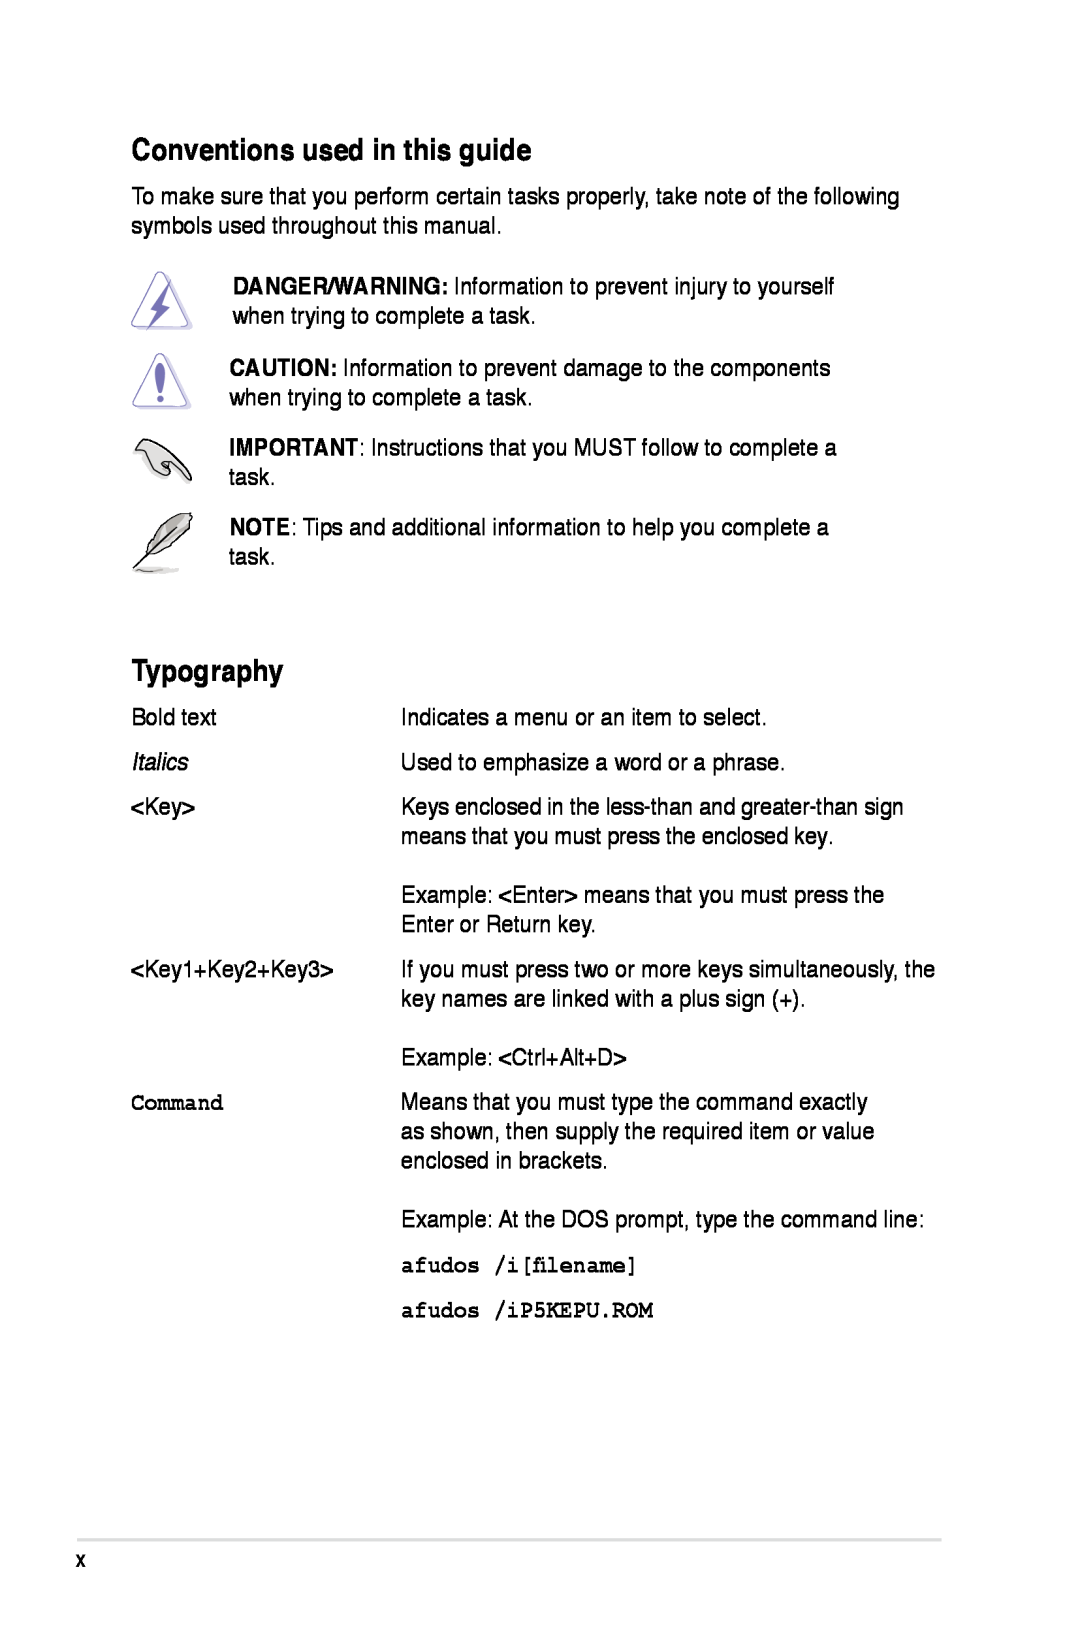 Asus P5K/EPU manual Conventions used in this guide, Typography, Italics, Command, afudos /ifilename, afudos /iP5KEPU.ROM 